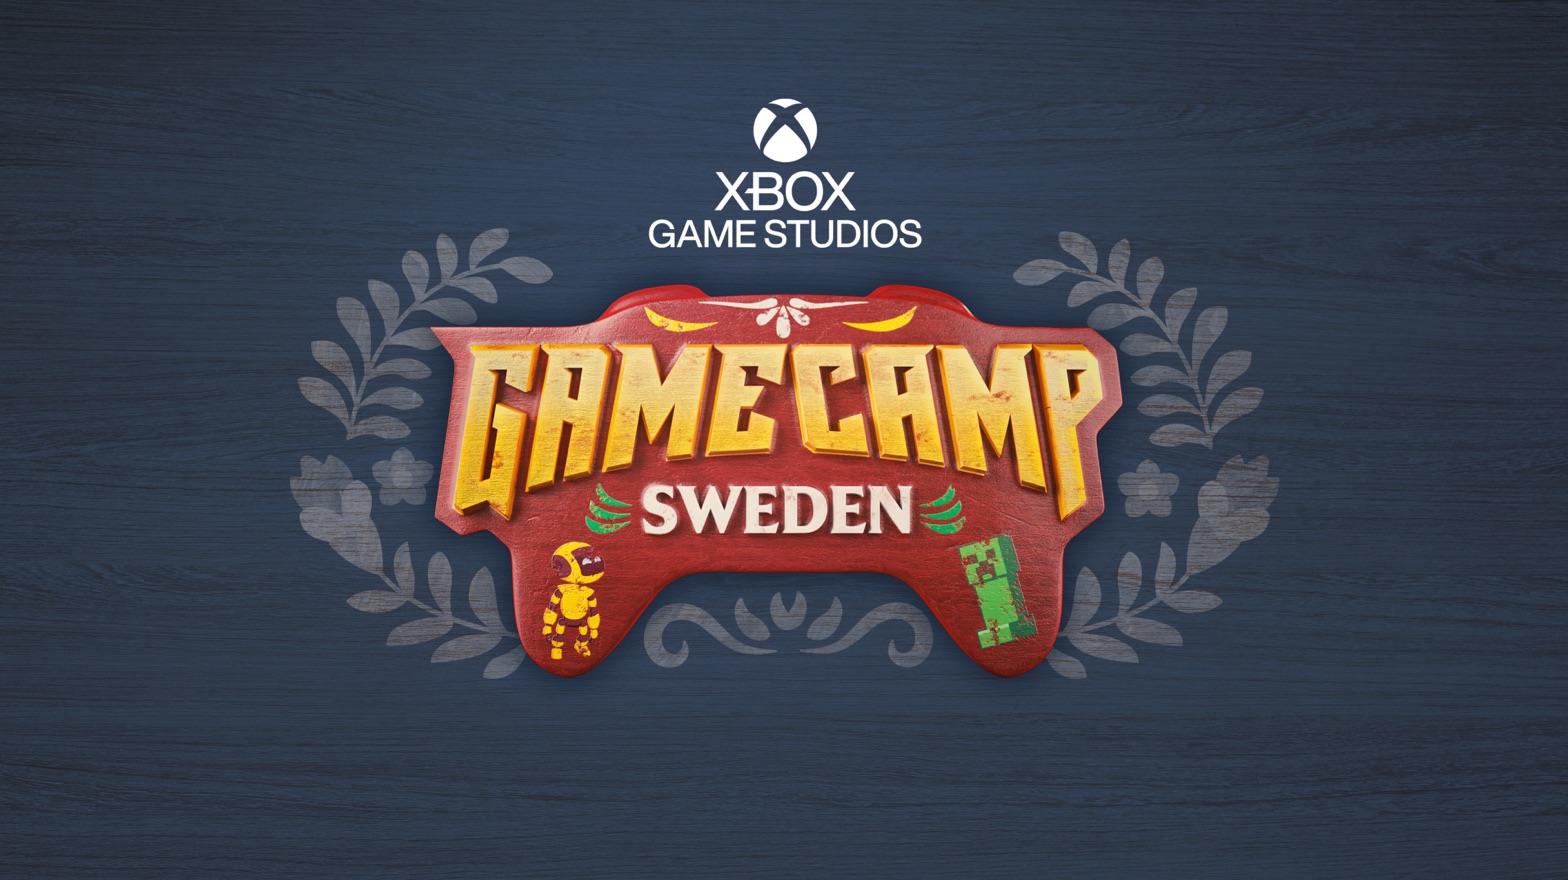 Hero image for Xbox Game Studios Game Camp Sweden